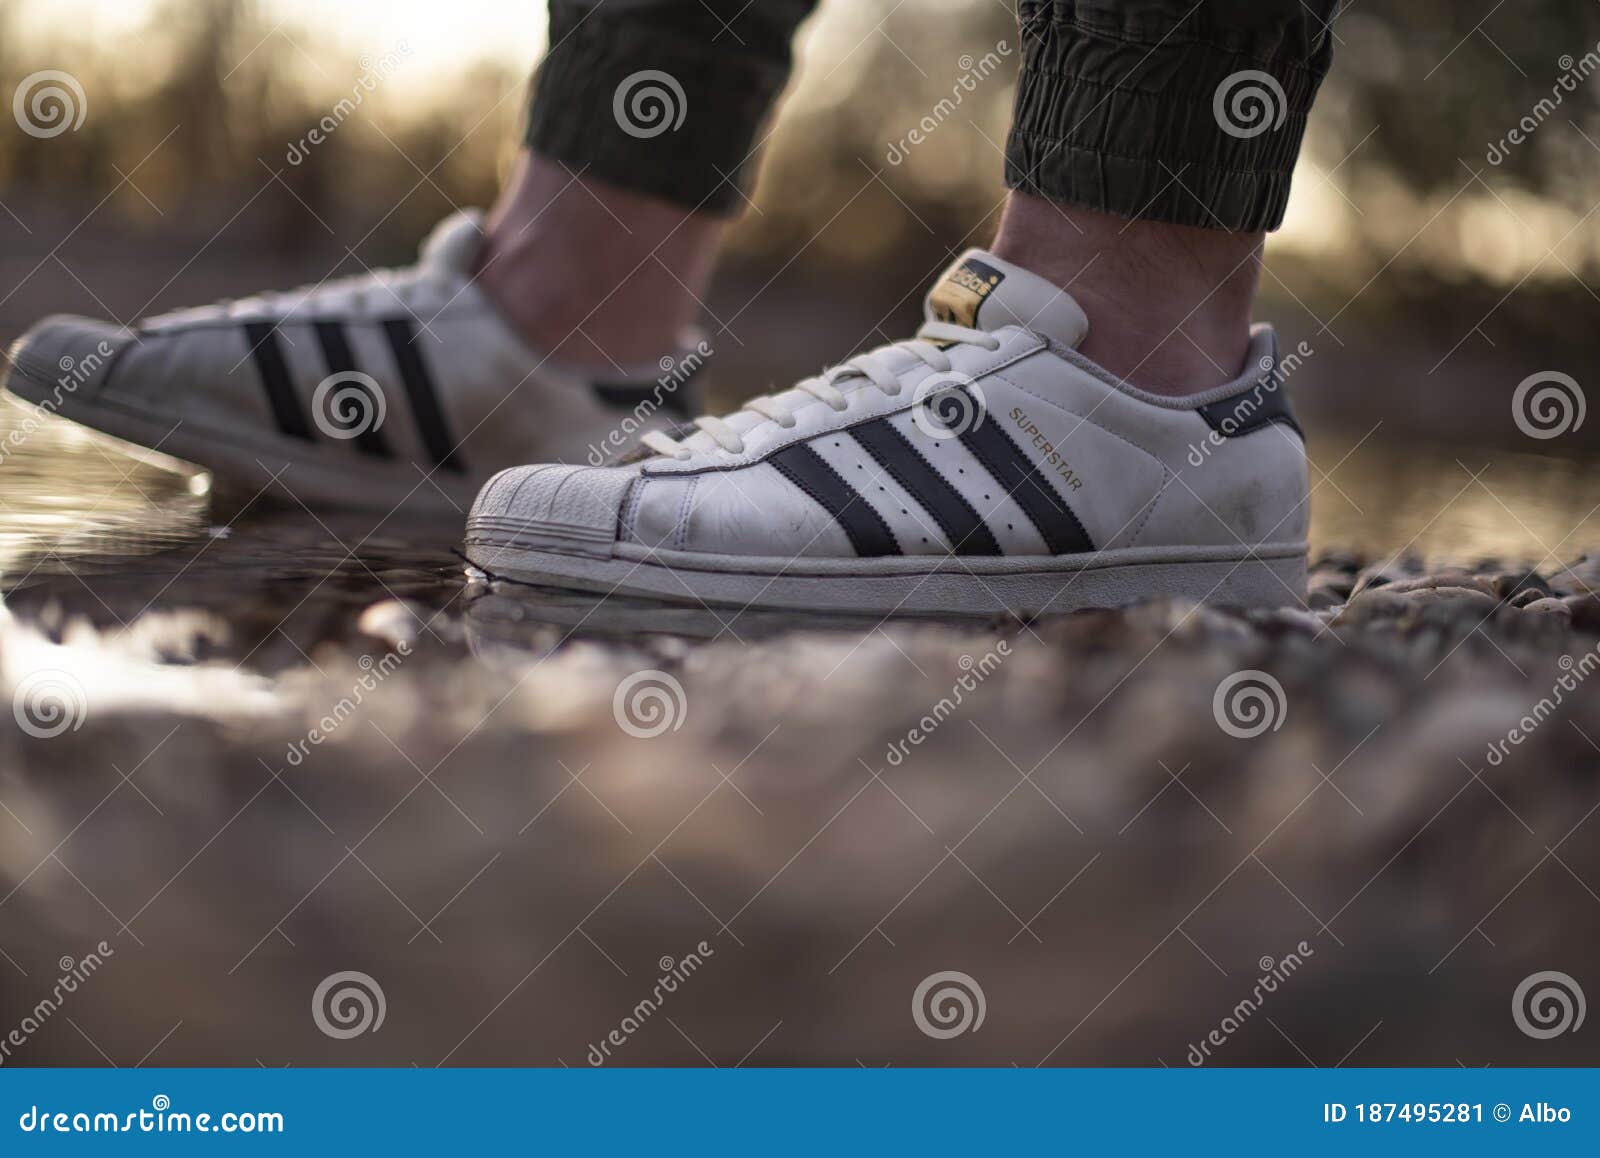 adidas old man shoes